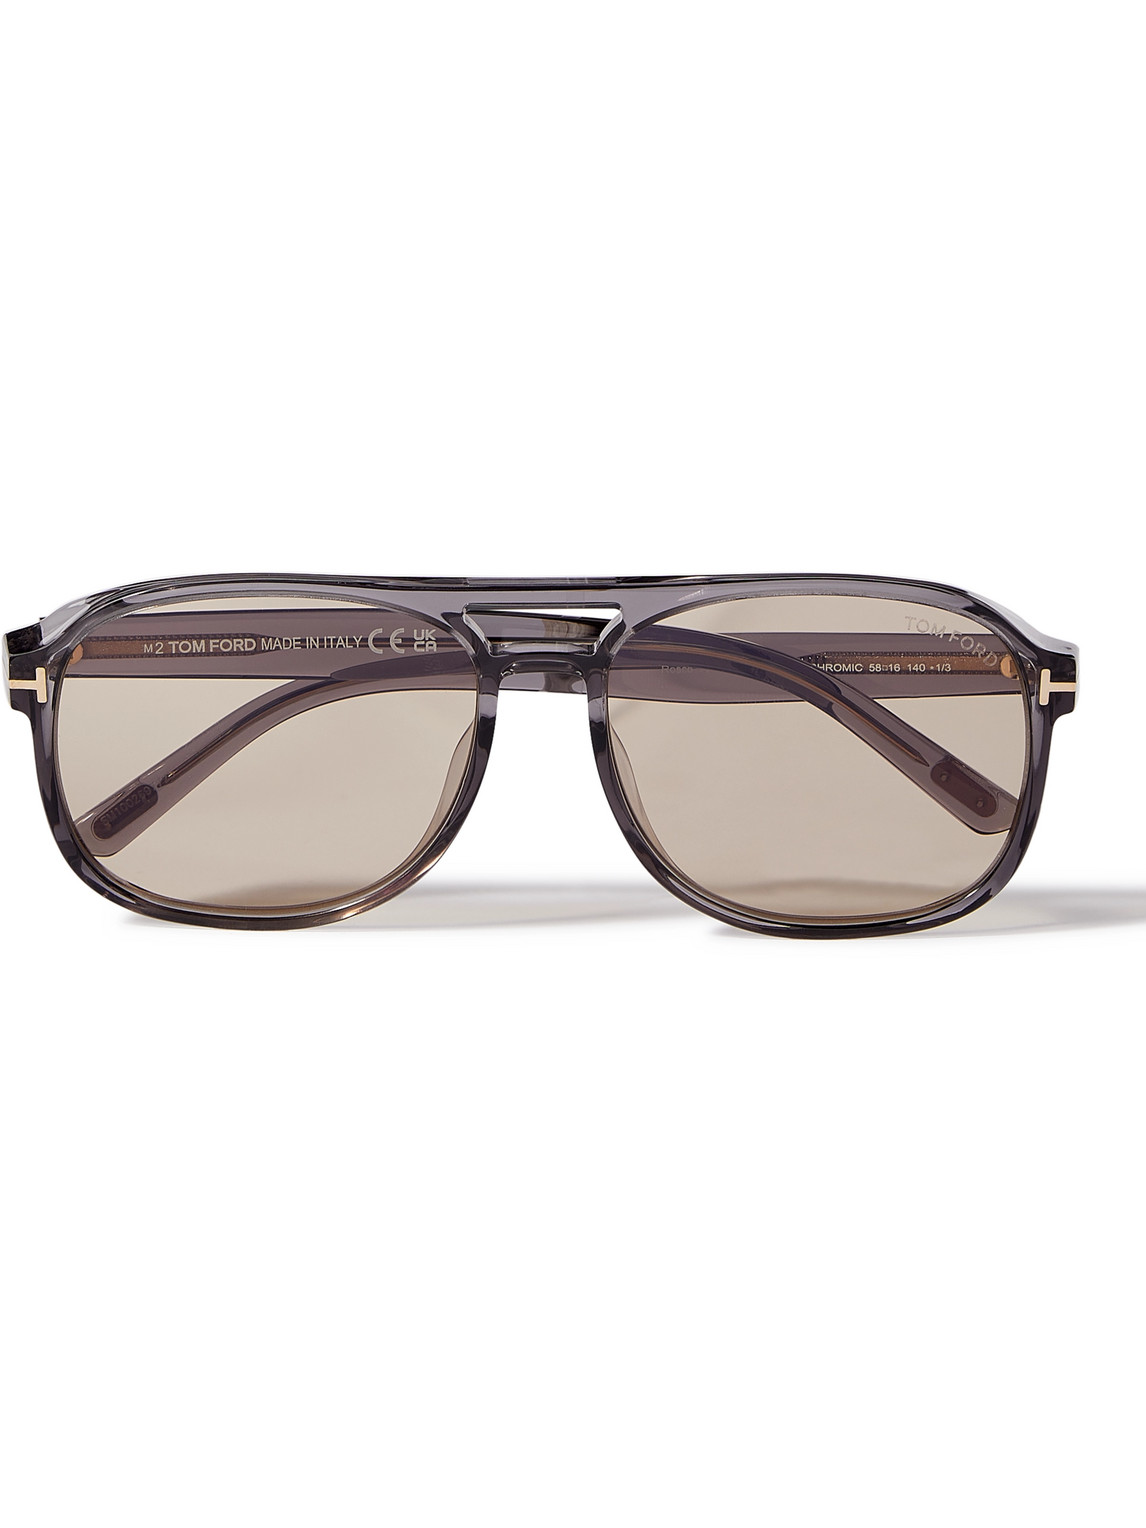 Tom Ford Aviator-style Acetate Sunglasses In Gray